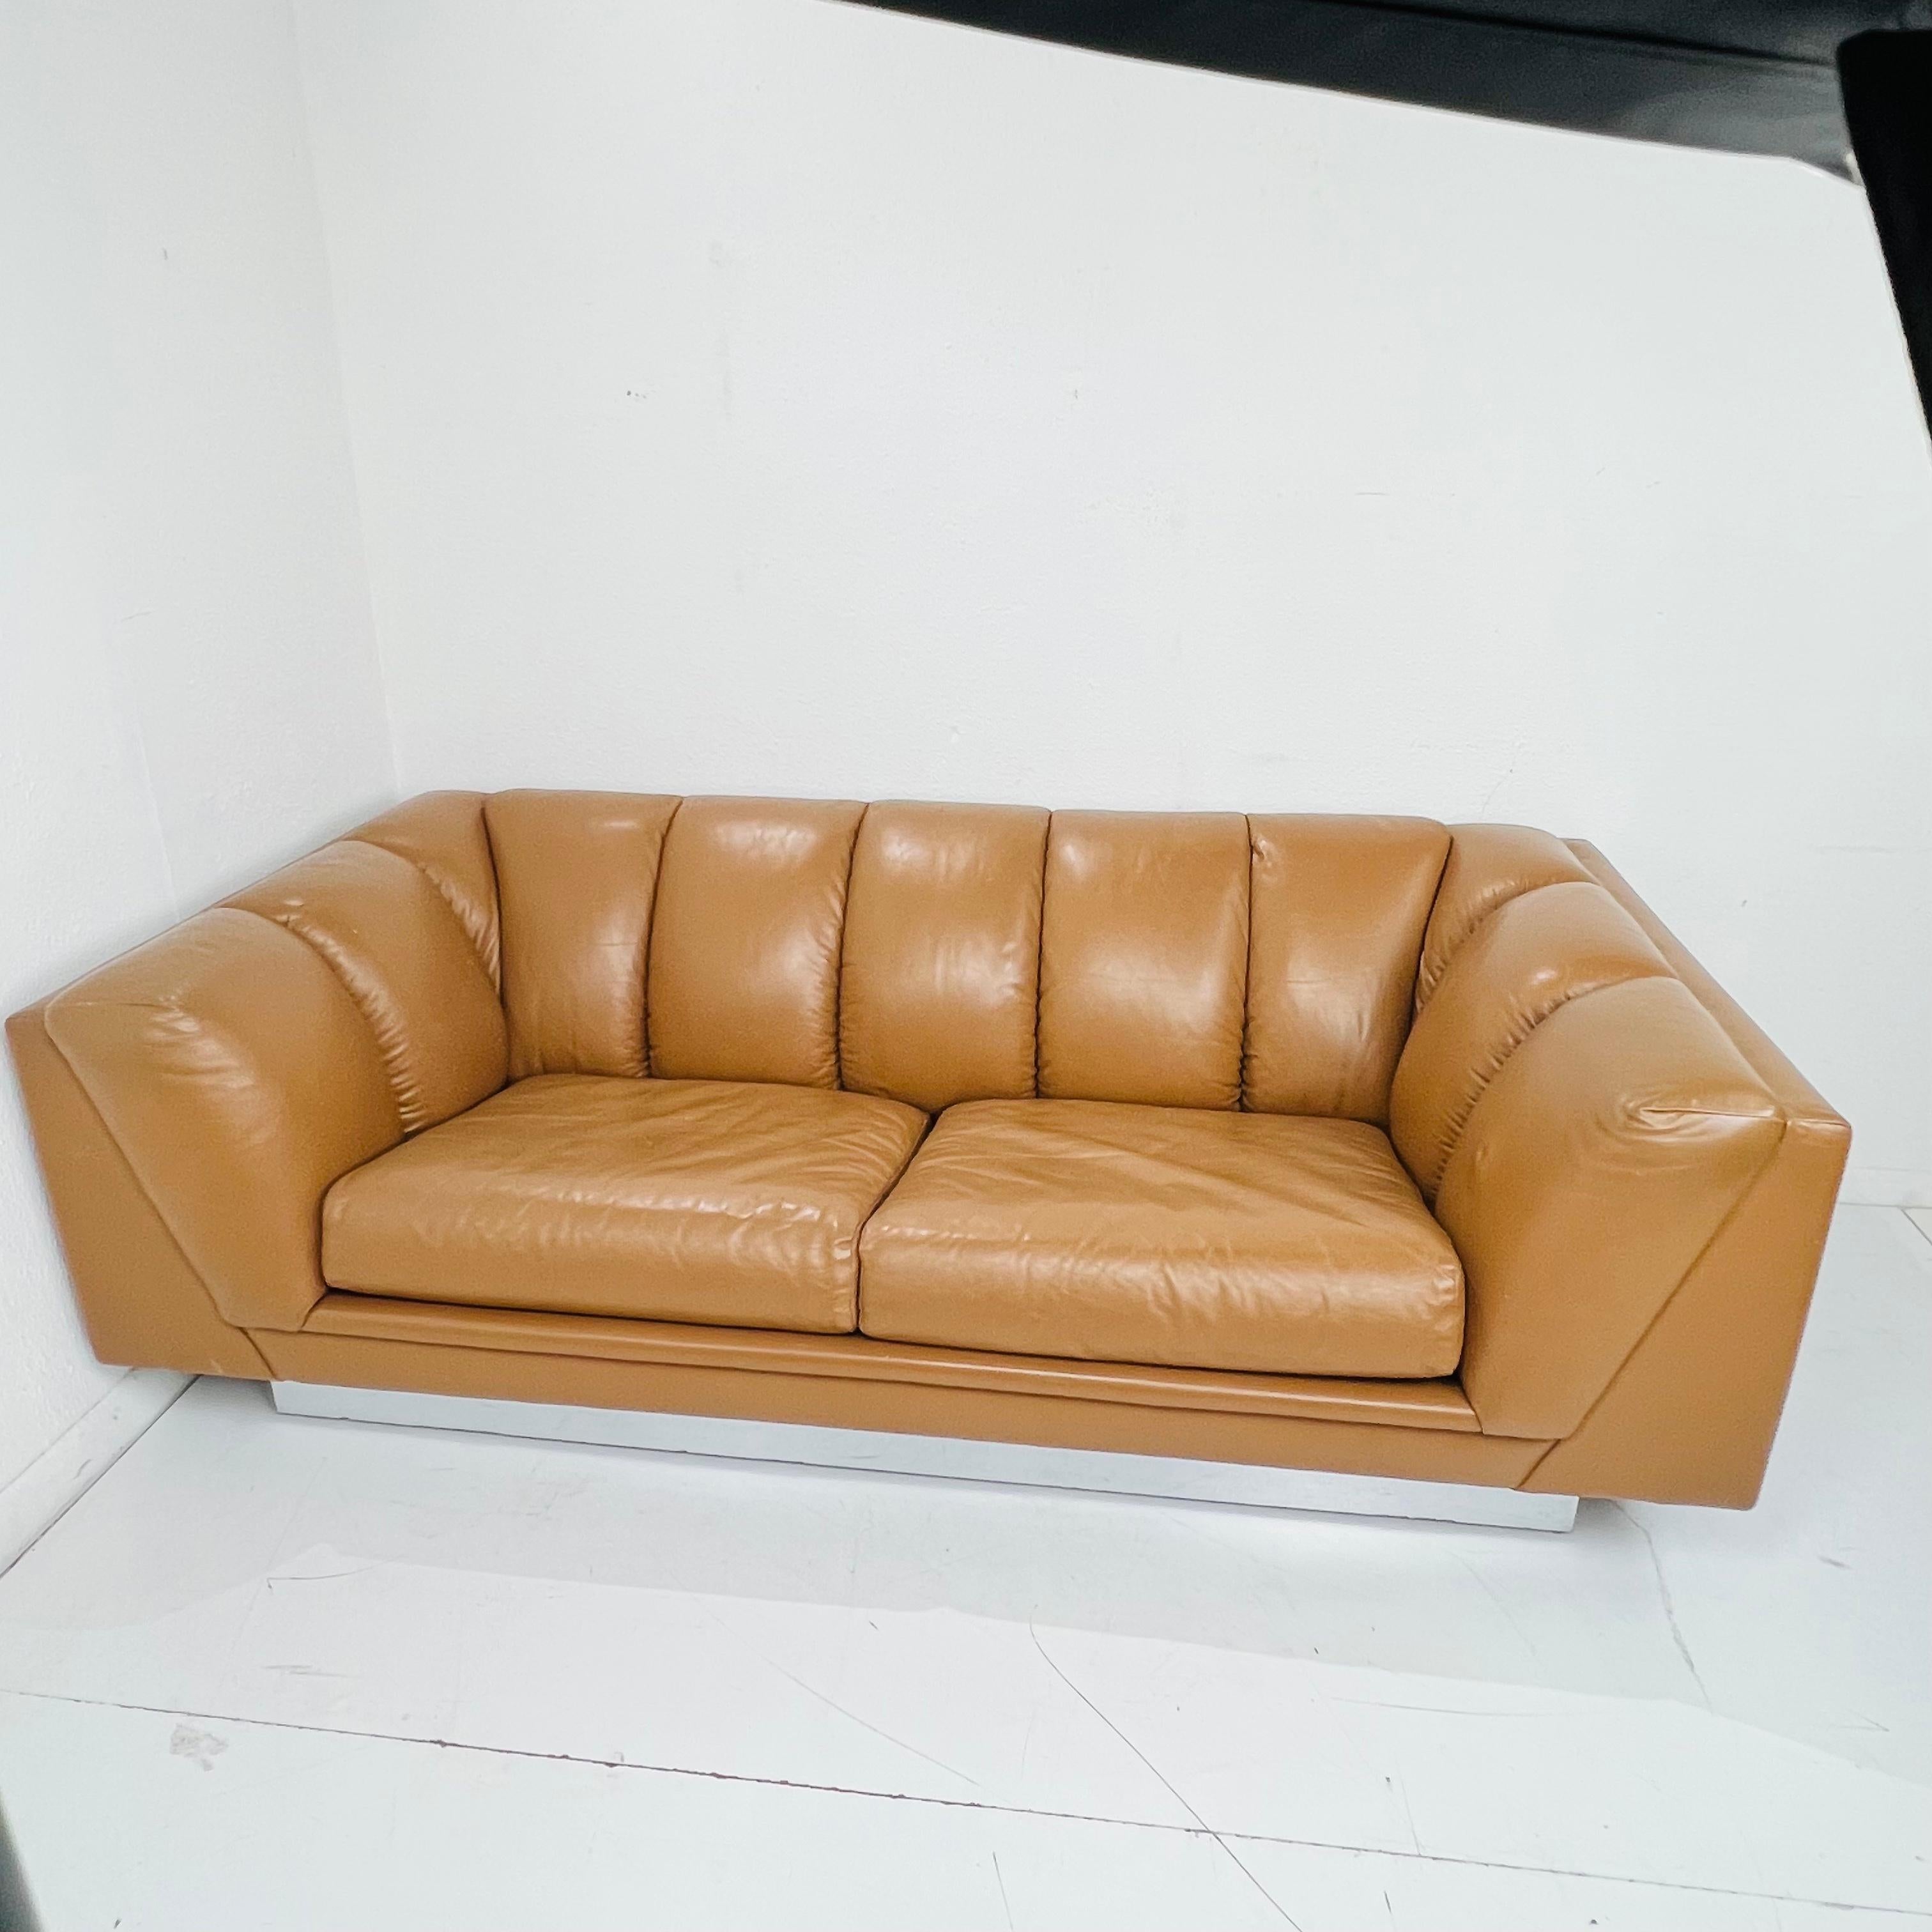 1970's Channeled Leather Sofa by Metropolitan In Good Condition For Sale In Dallas, TX